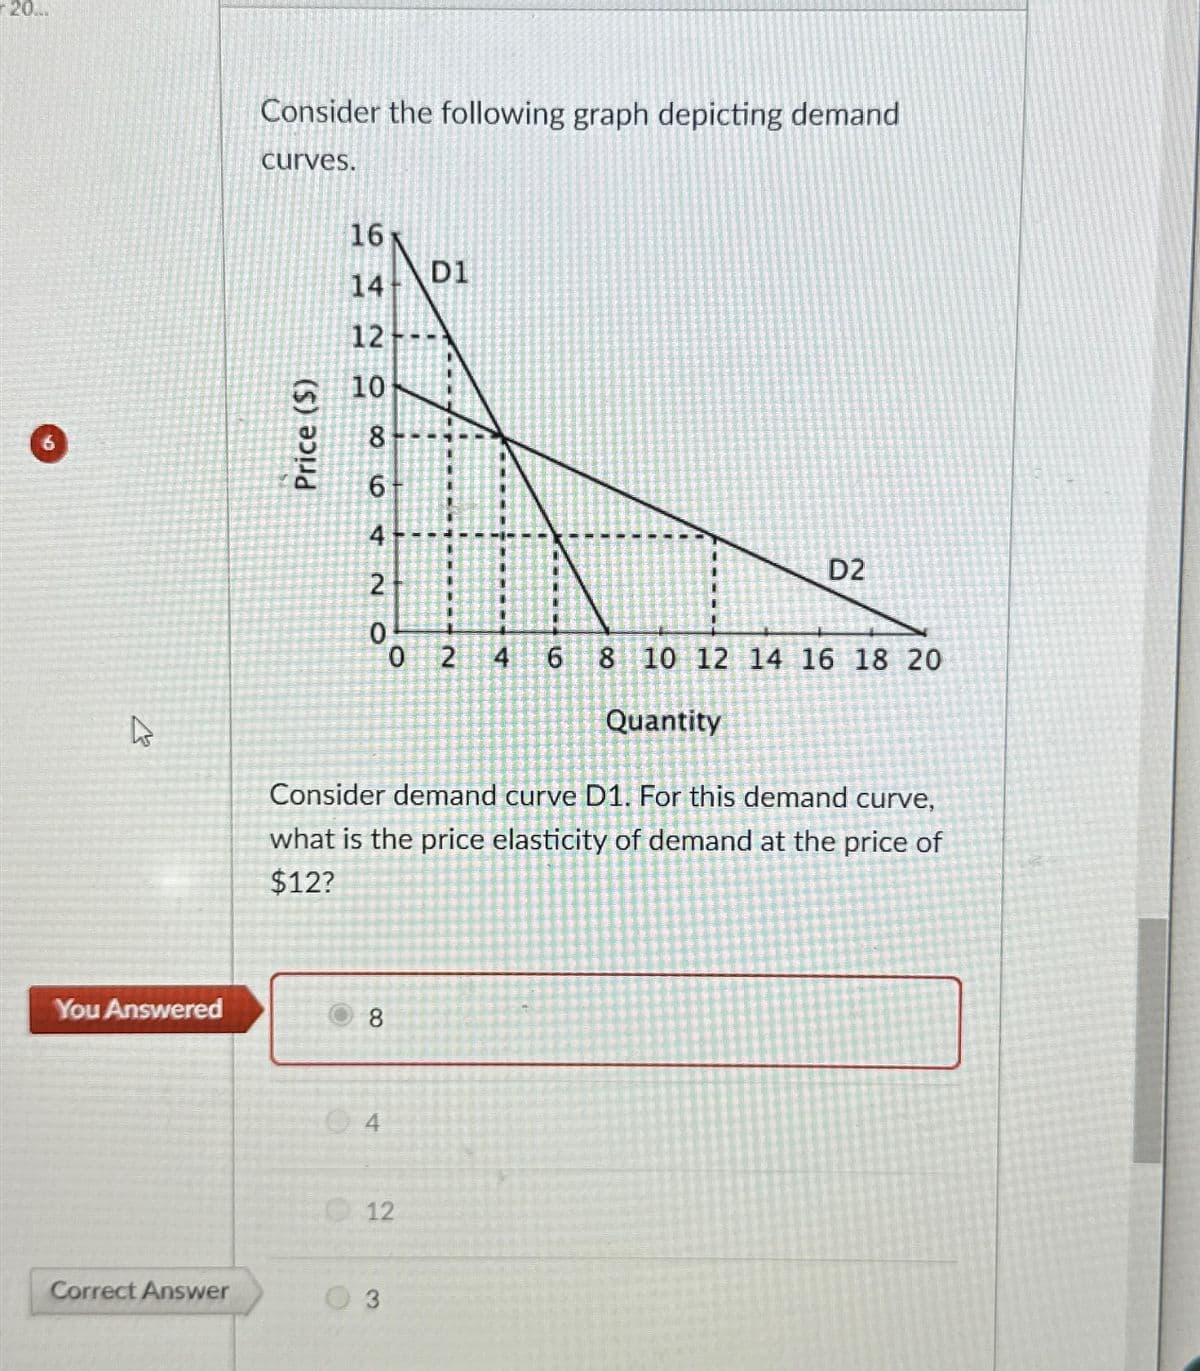 20...
K
You Answered
Correct Answer
Consider the following graph depicting demand
curves.
Price ($)
16
14
12
10
8-
6
4
2
0
8
4
D1
0 2
12
3
Consider demand curve D1. For this demand curve,
what is the price elasticity of demand at the price of
$12?
4 6
D2
8 10 12 14 16 18 20
Quantity